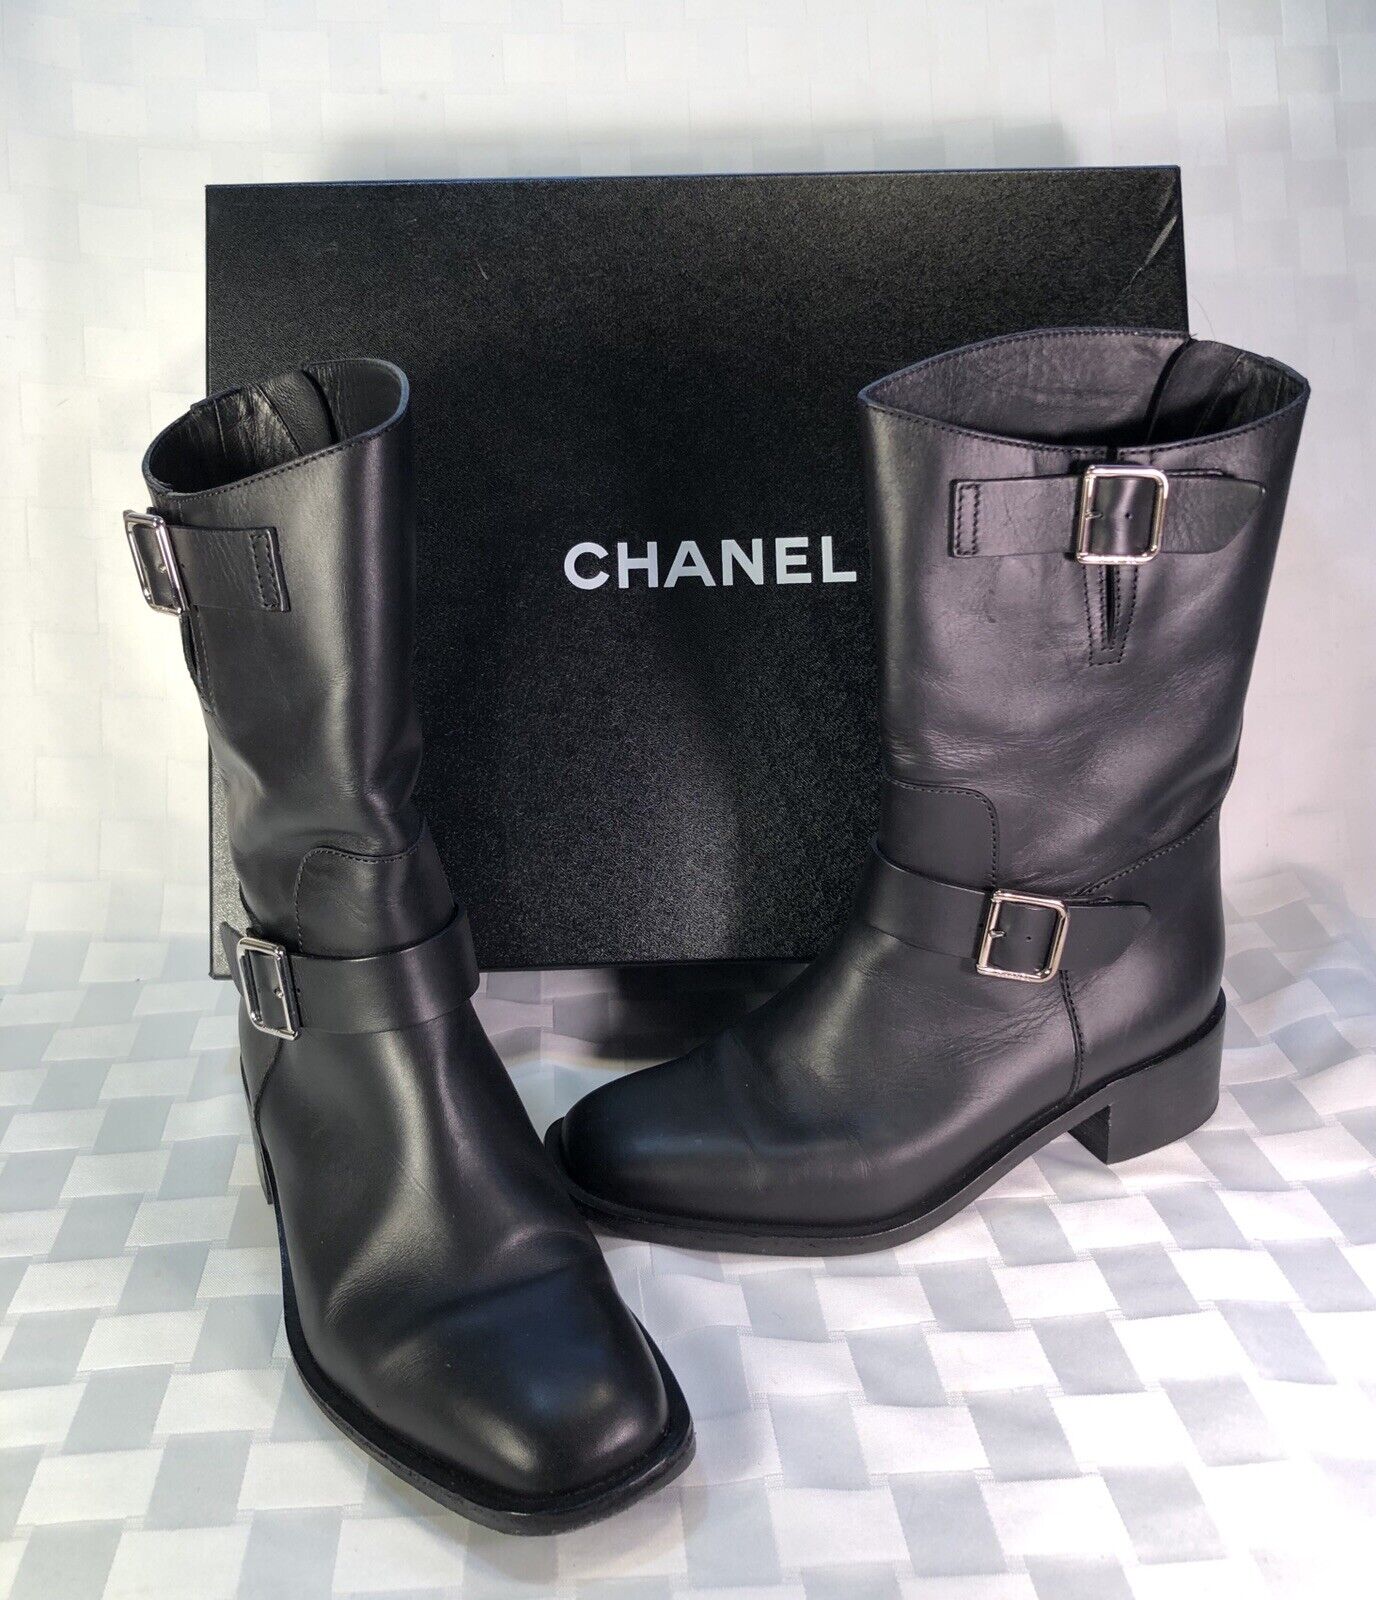 Authentic 2012 CHANEL Mail order Albuquerque Mall cheap Moto Boots Black Karl 39.5 Size Lagerfeld Leather Mid-Calf